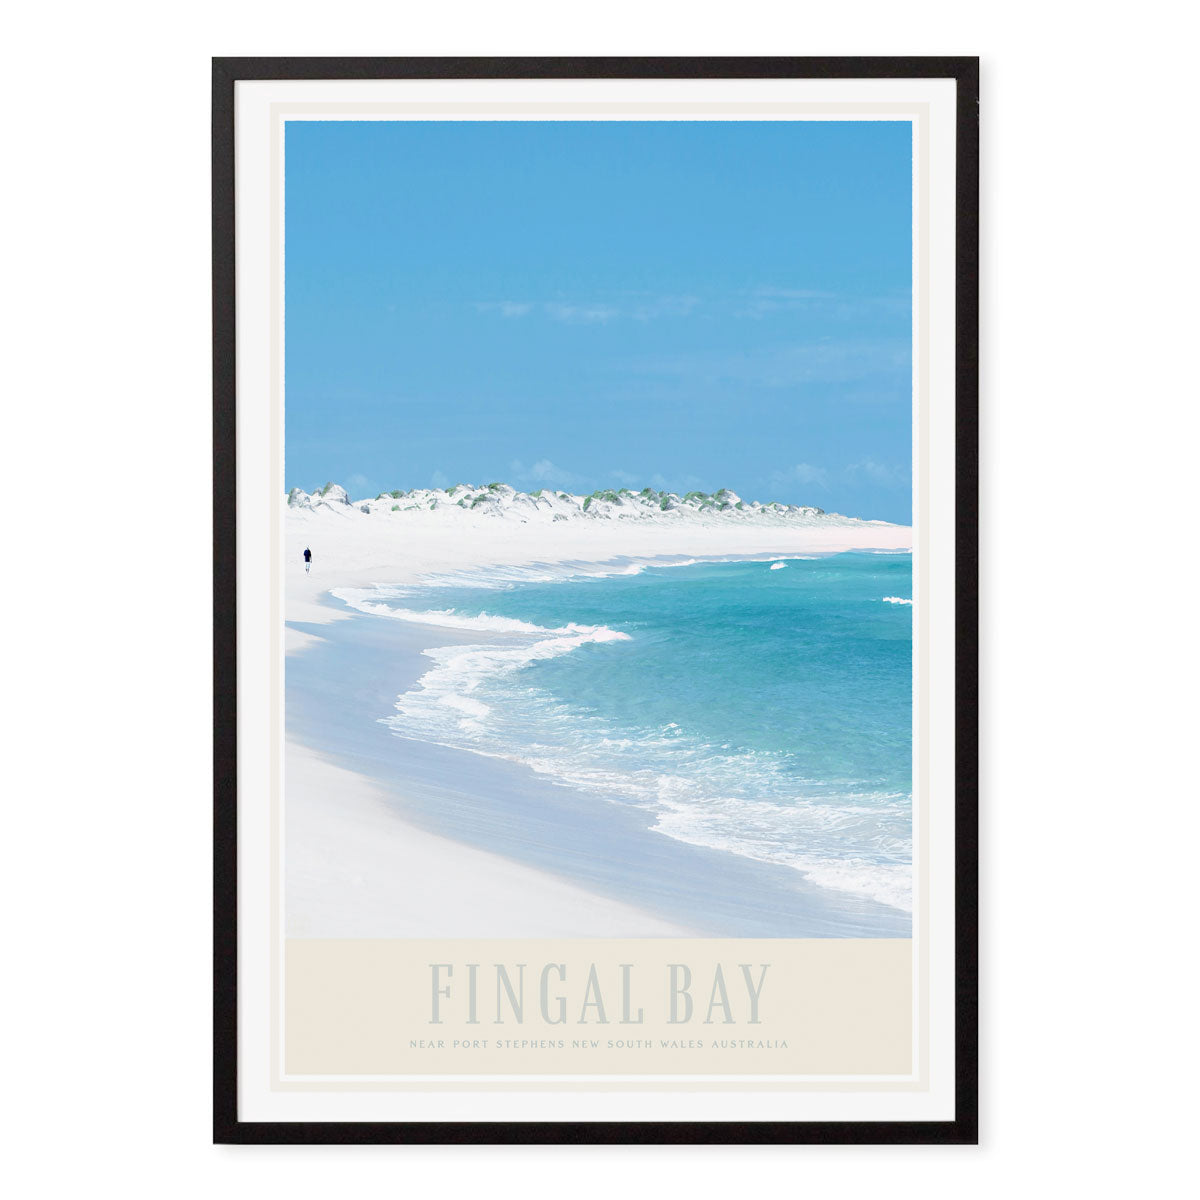 Fingal bay vintage retro poster print in black frame by places we luv